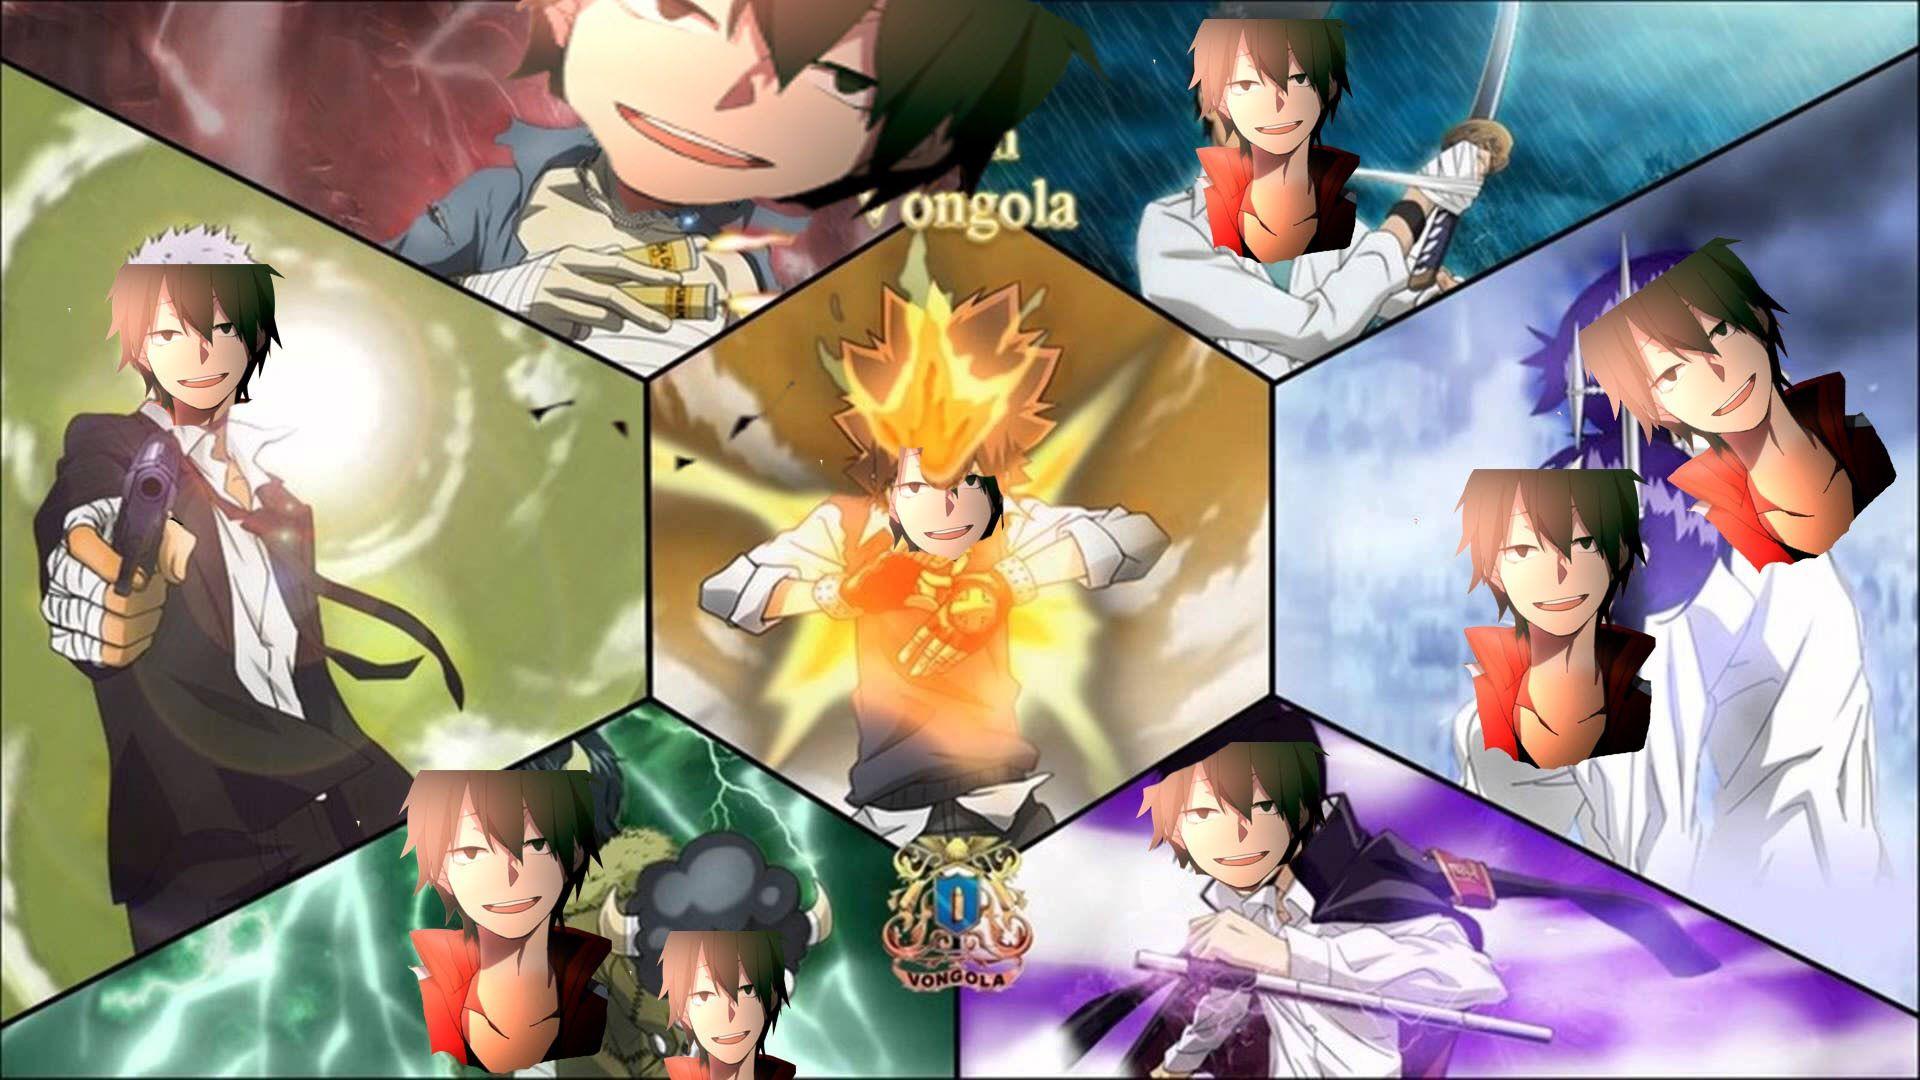 THE GAMEPLAY OF THE NEW 10TH VONGOLA LEADER. Katekyo Hitman